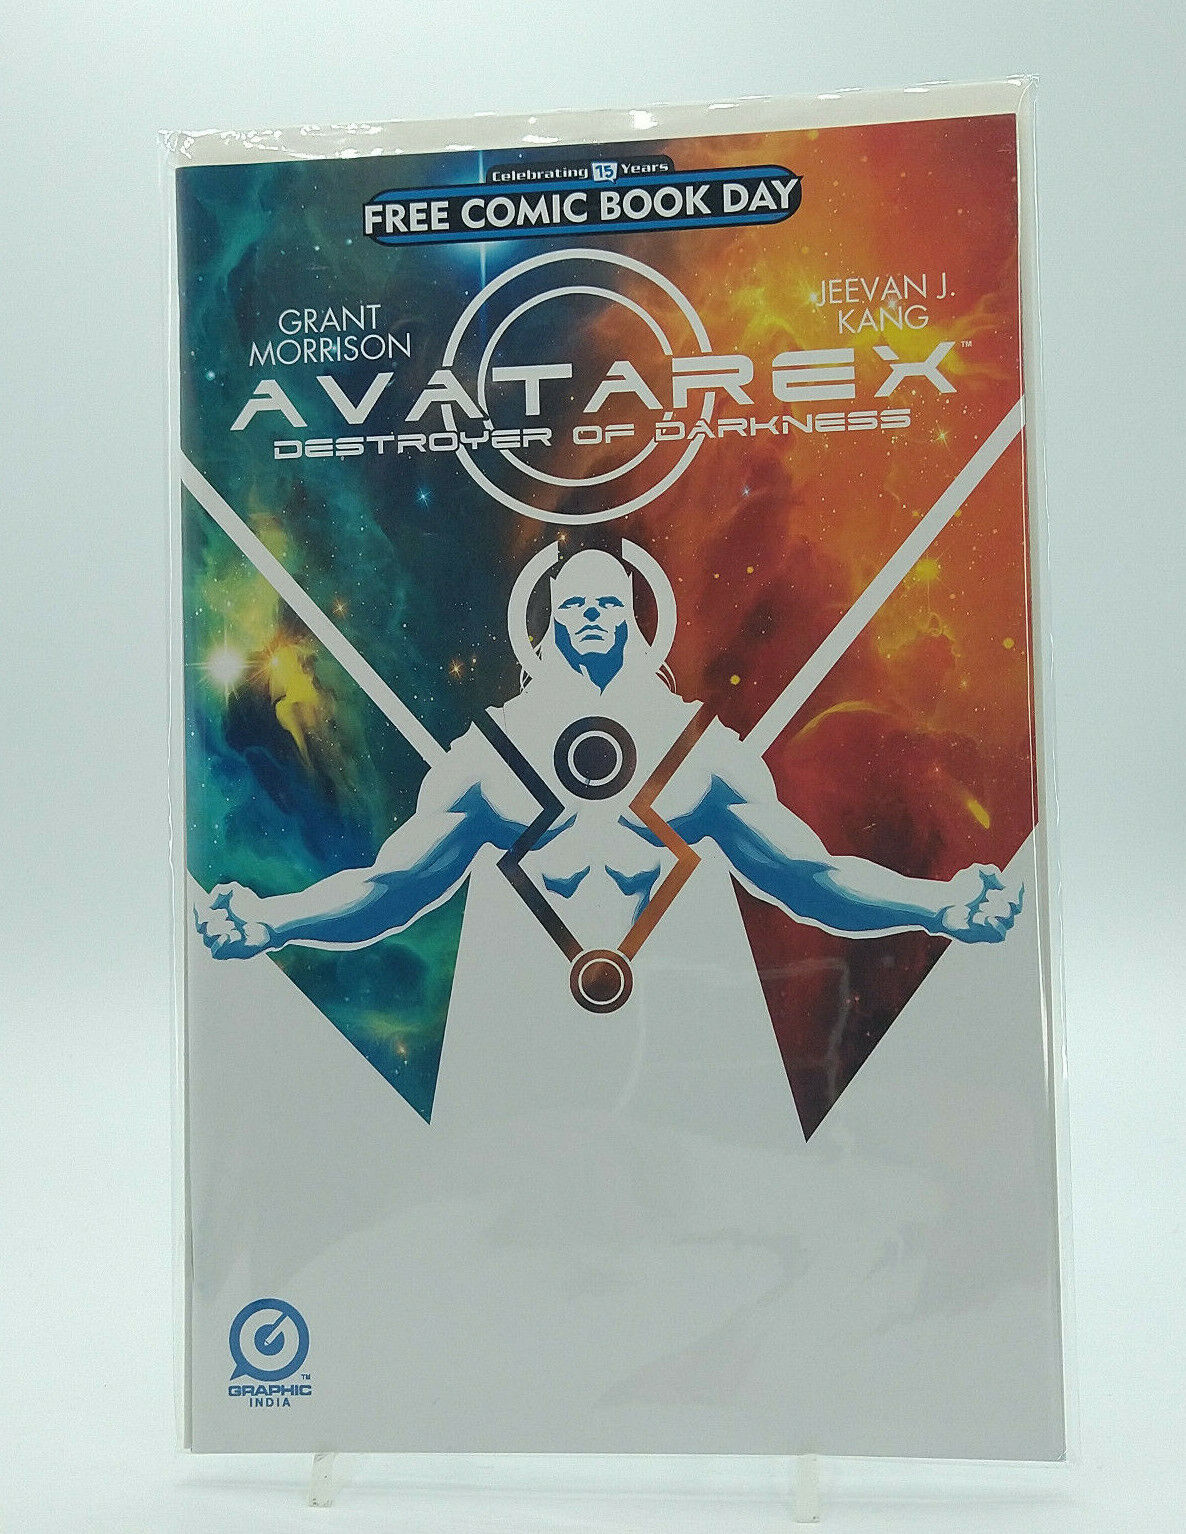 Avatarex Destroyer of Darkness Free Comic Book Day 2016 NM